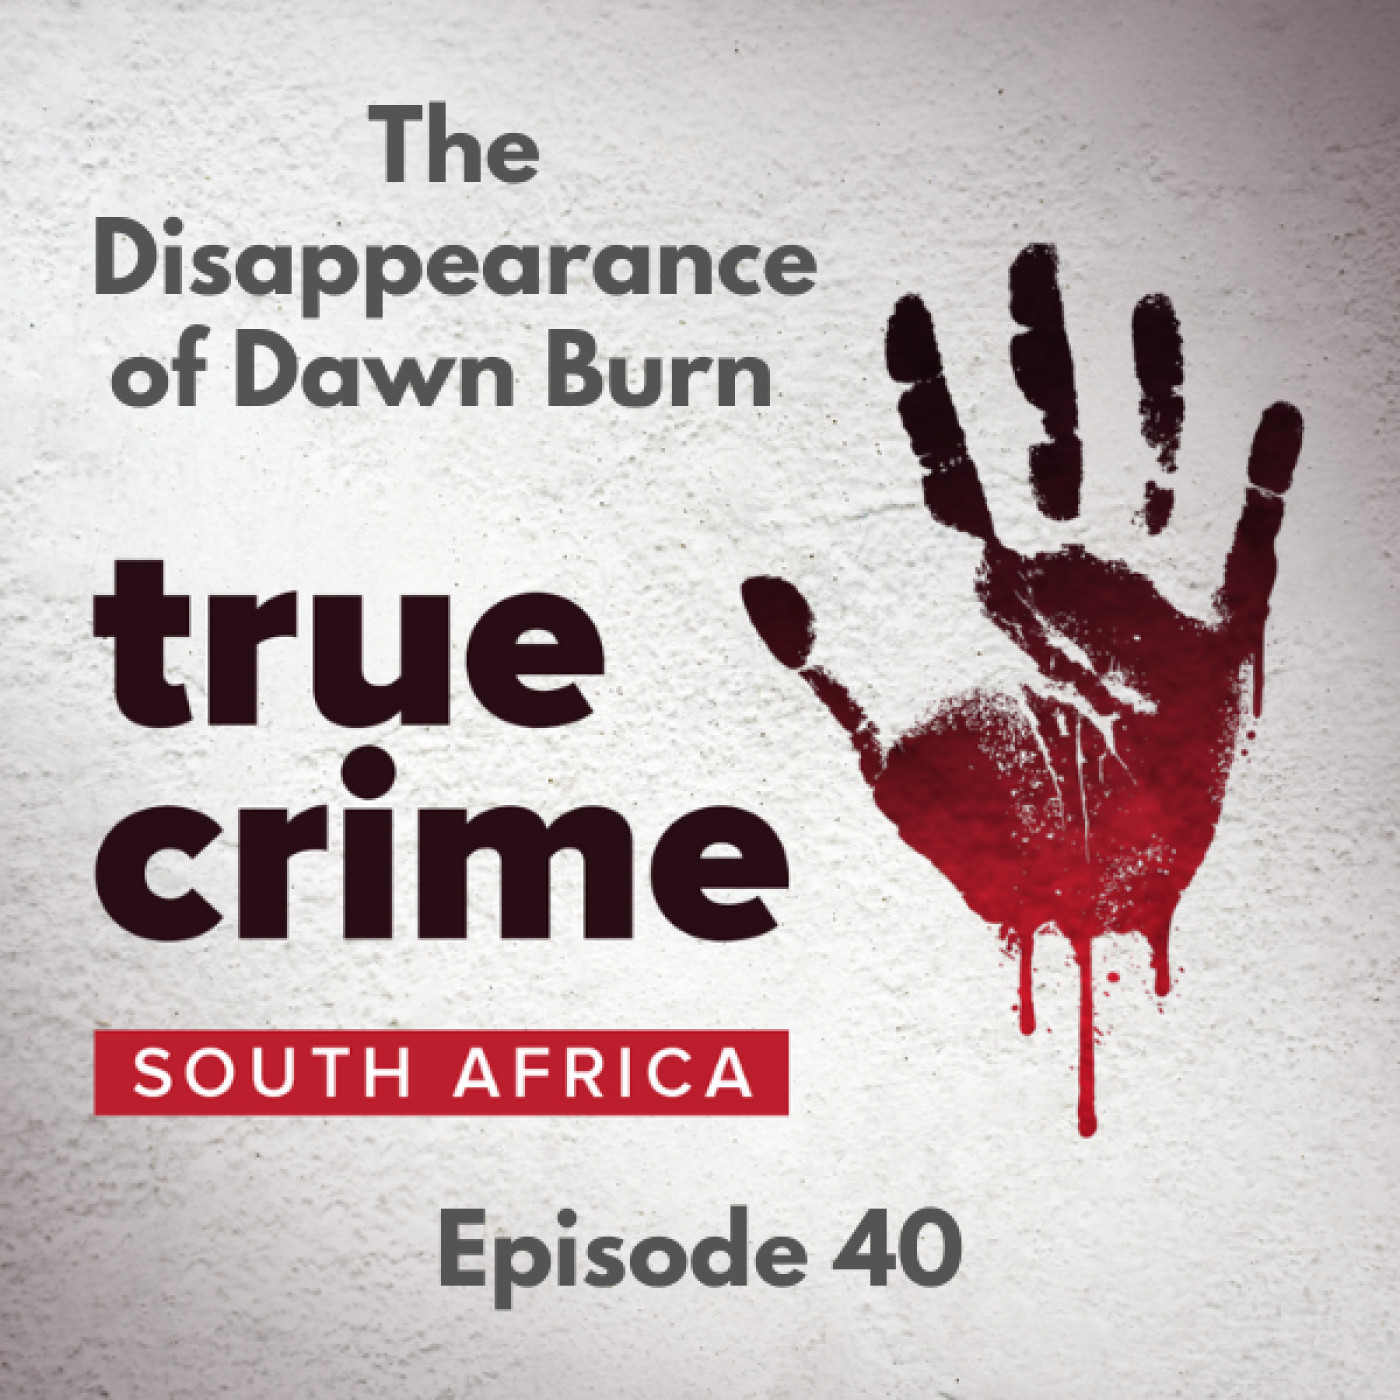 Episode 40 - The Disappearance of Dawn Burn